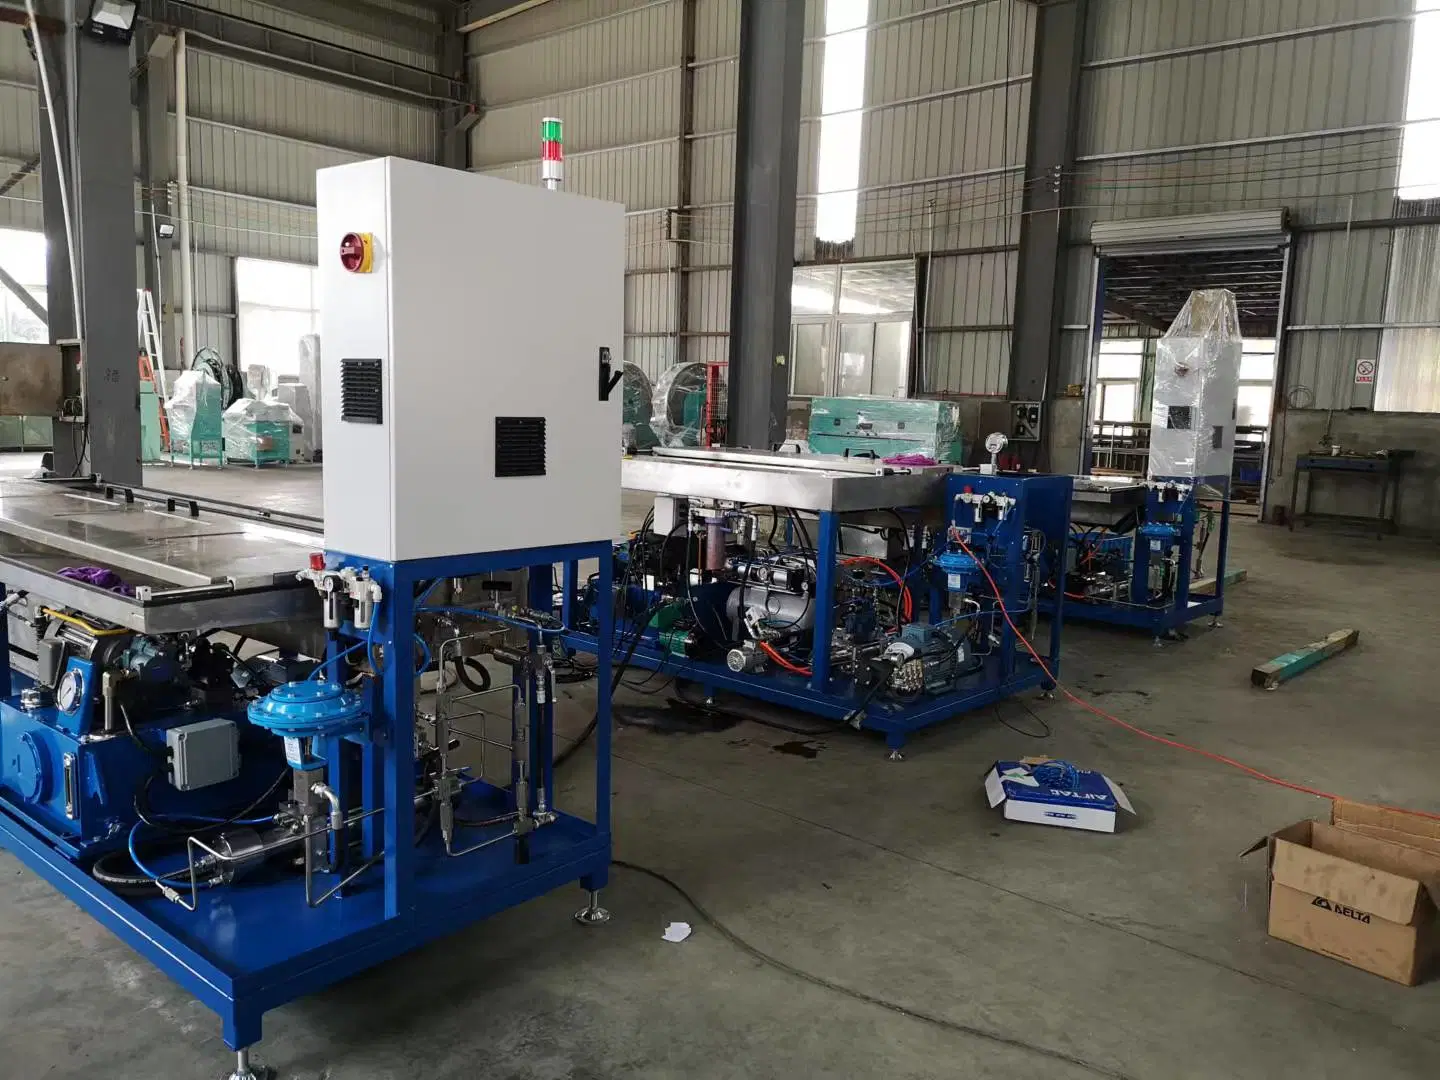 Test 1000 Hoses One Day Integrationautomatic Hydraulic Hose Pressure Test and Cleaning Machine